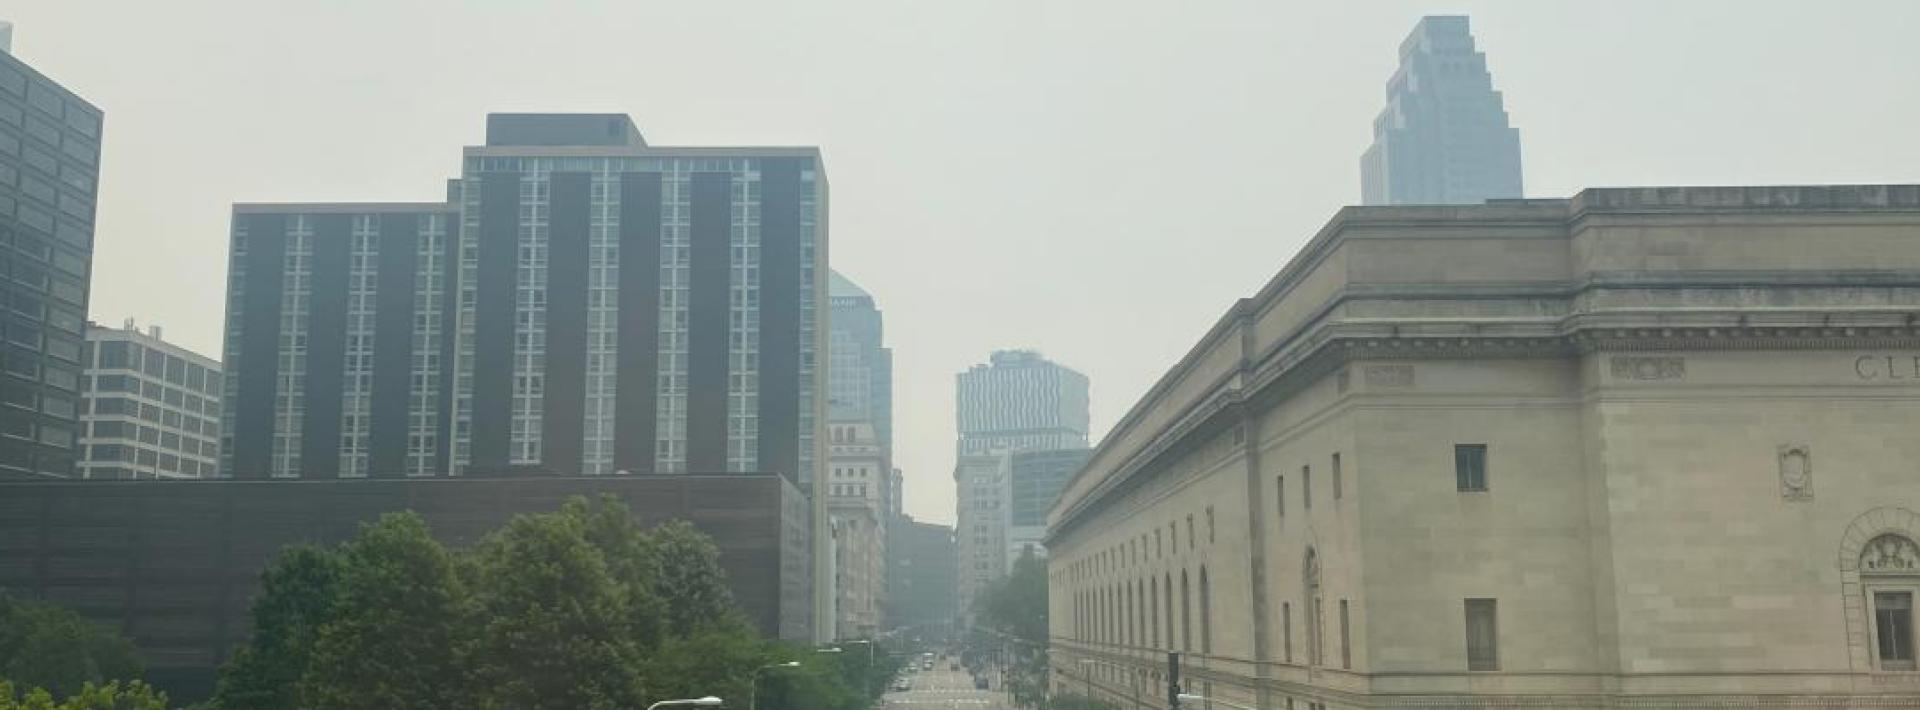 air pollution in downtown cleveland